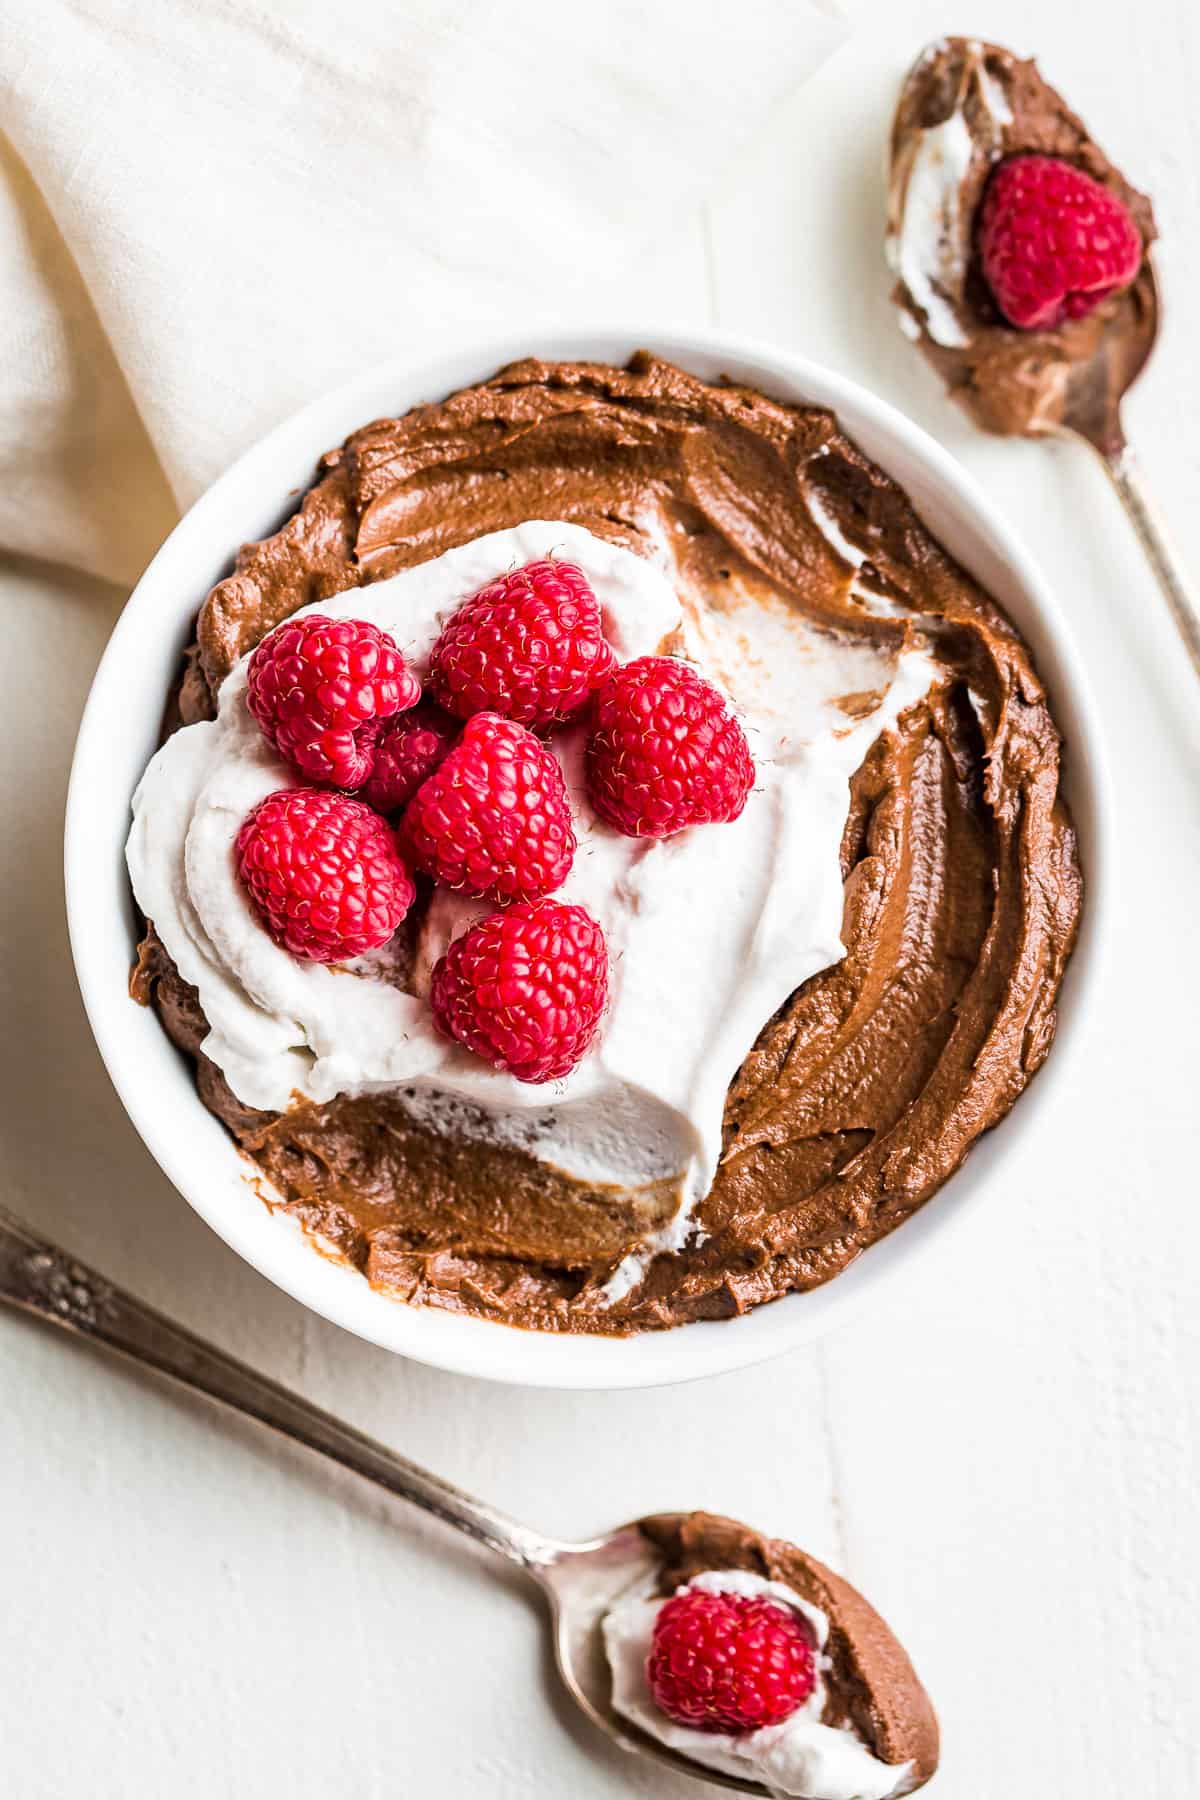 Straight down view of Avocado Chocolate Mousse in a white bowl topped with whipped cream and raspberries with 2 spoons scooping out 2 bites on the side of the bowl.